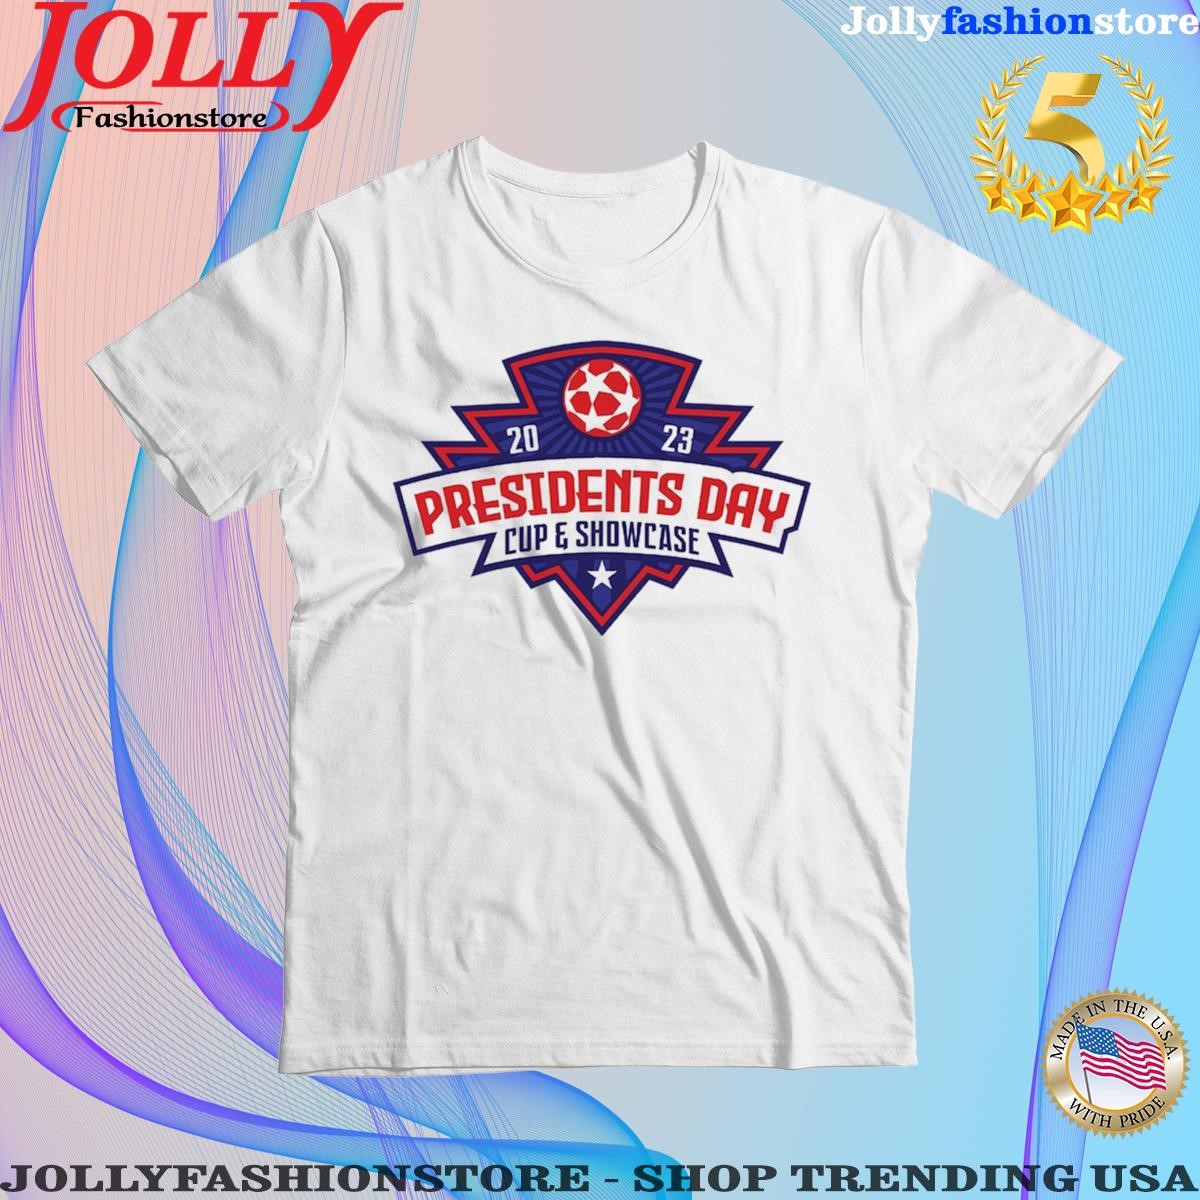 Trending 2023 Presidents Day Cup & Showcase Shirt